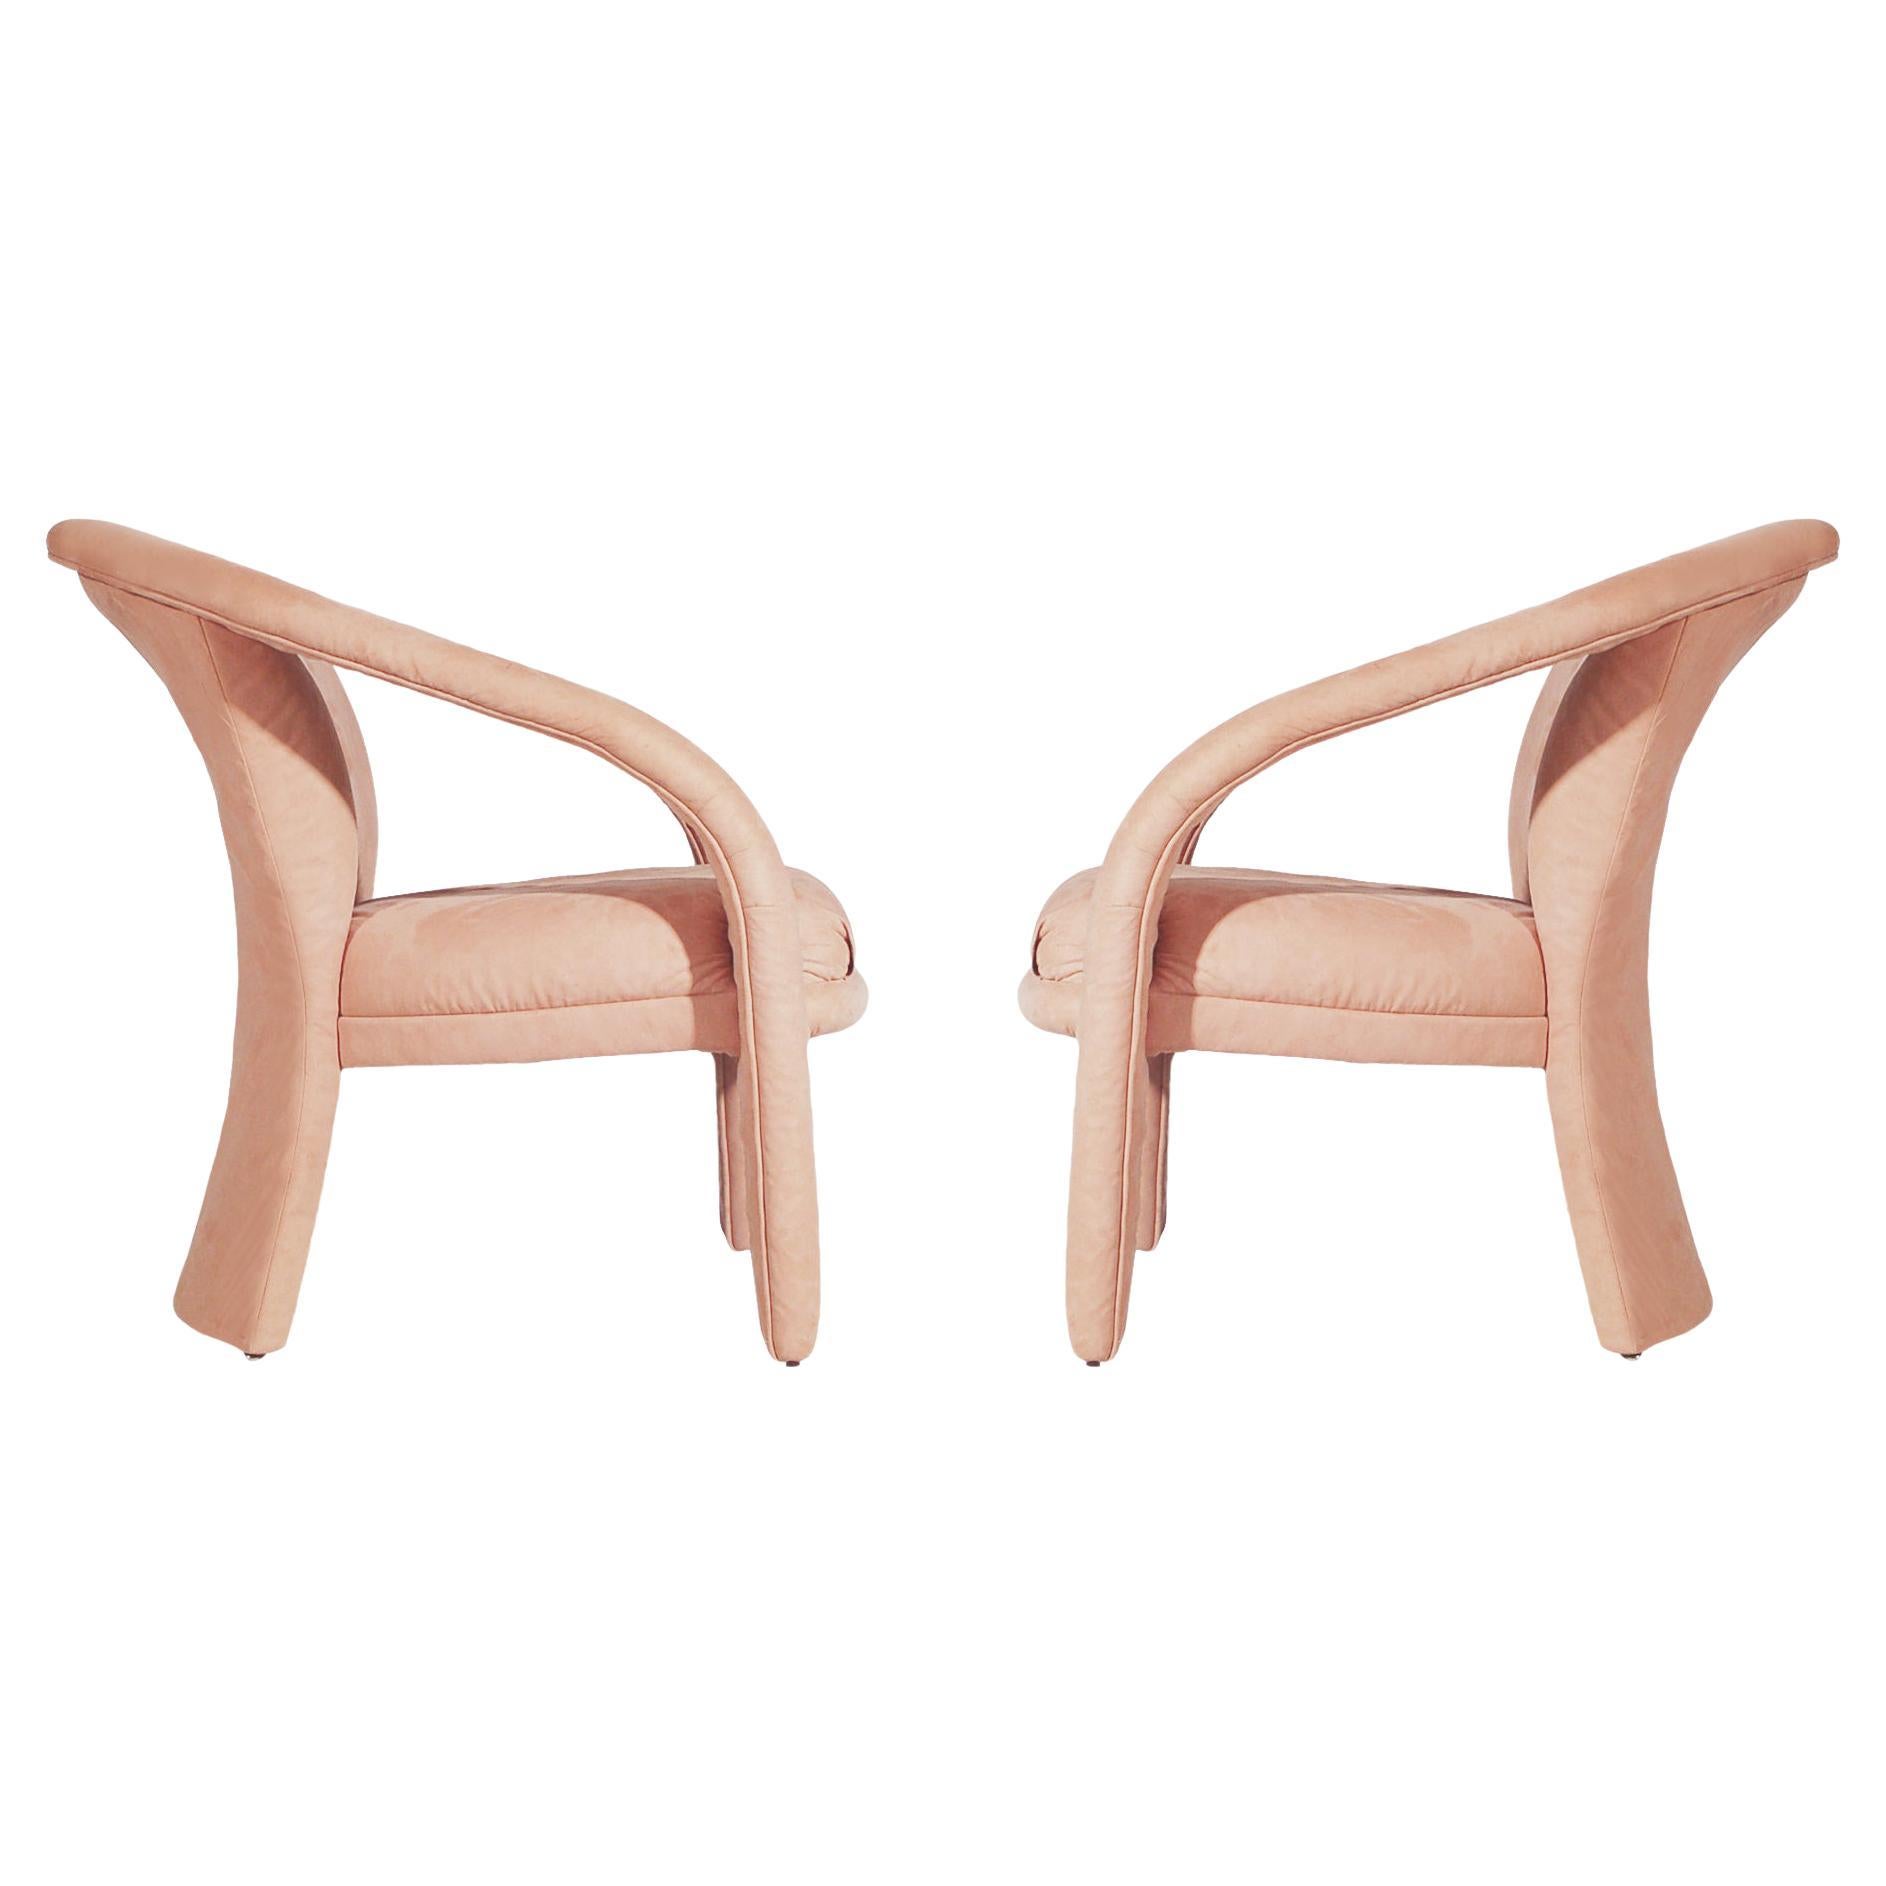 Pair of Decorator Mid Century Post Modern Armchair Lounge Chairs in Blush Pink For Sale